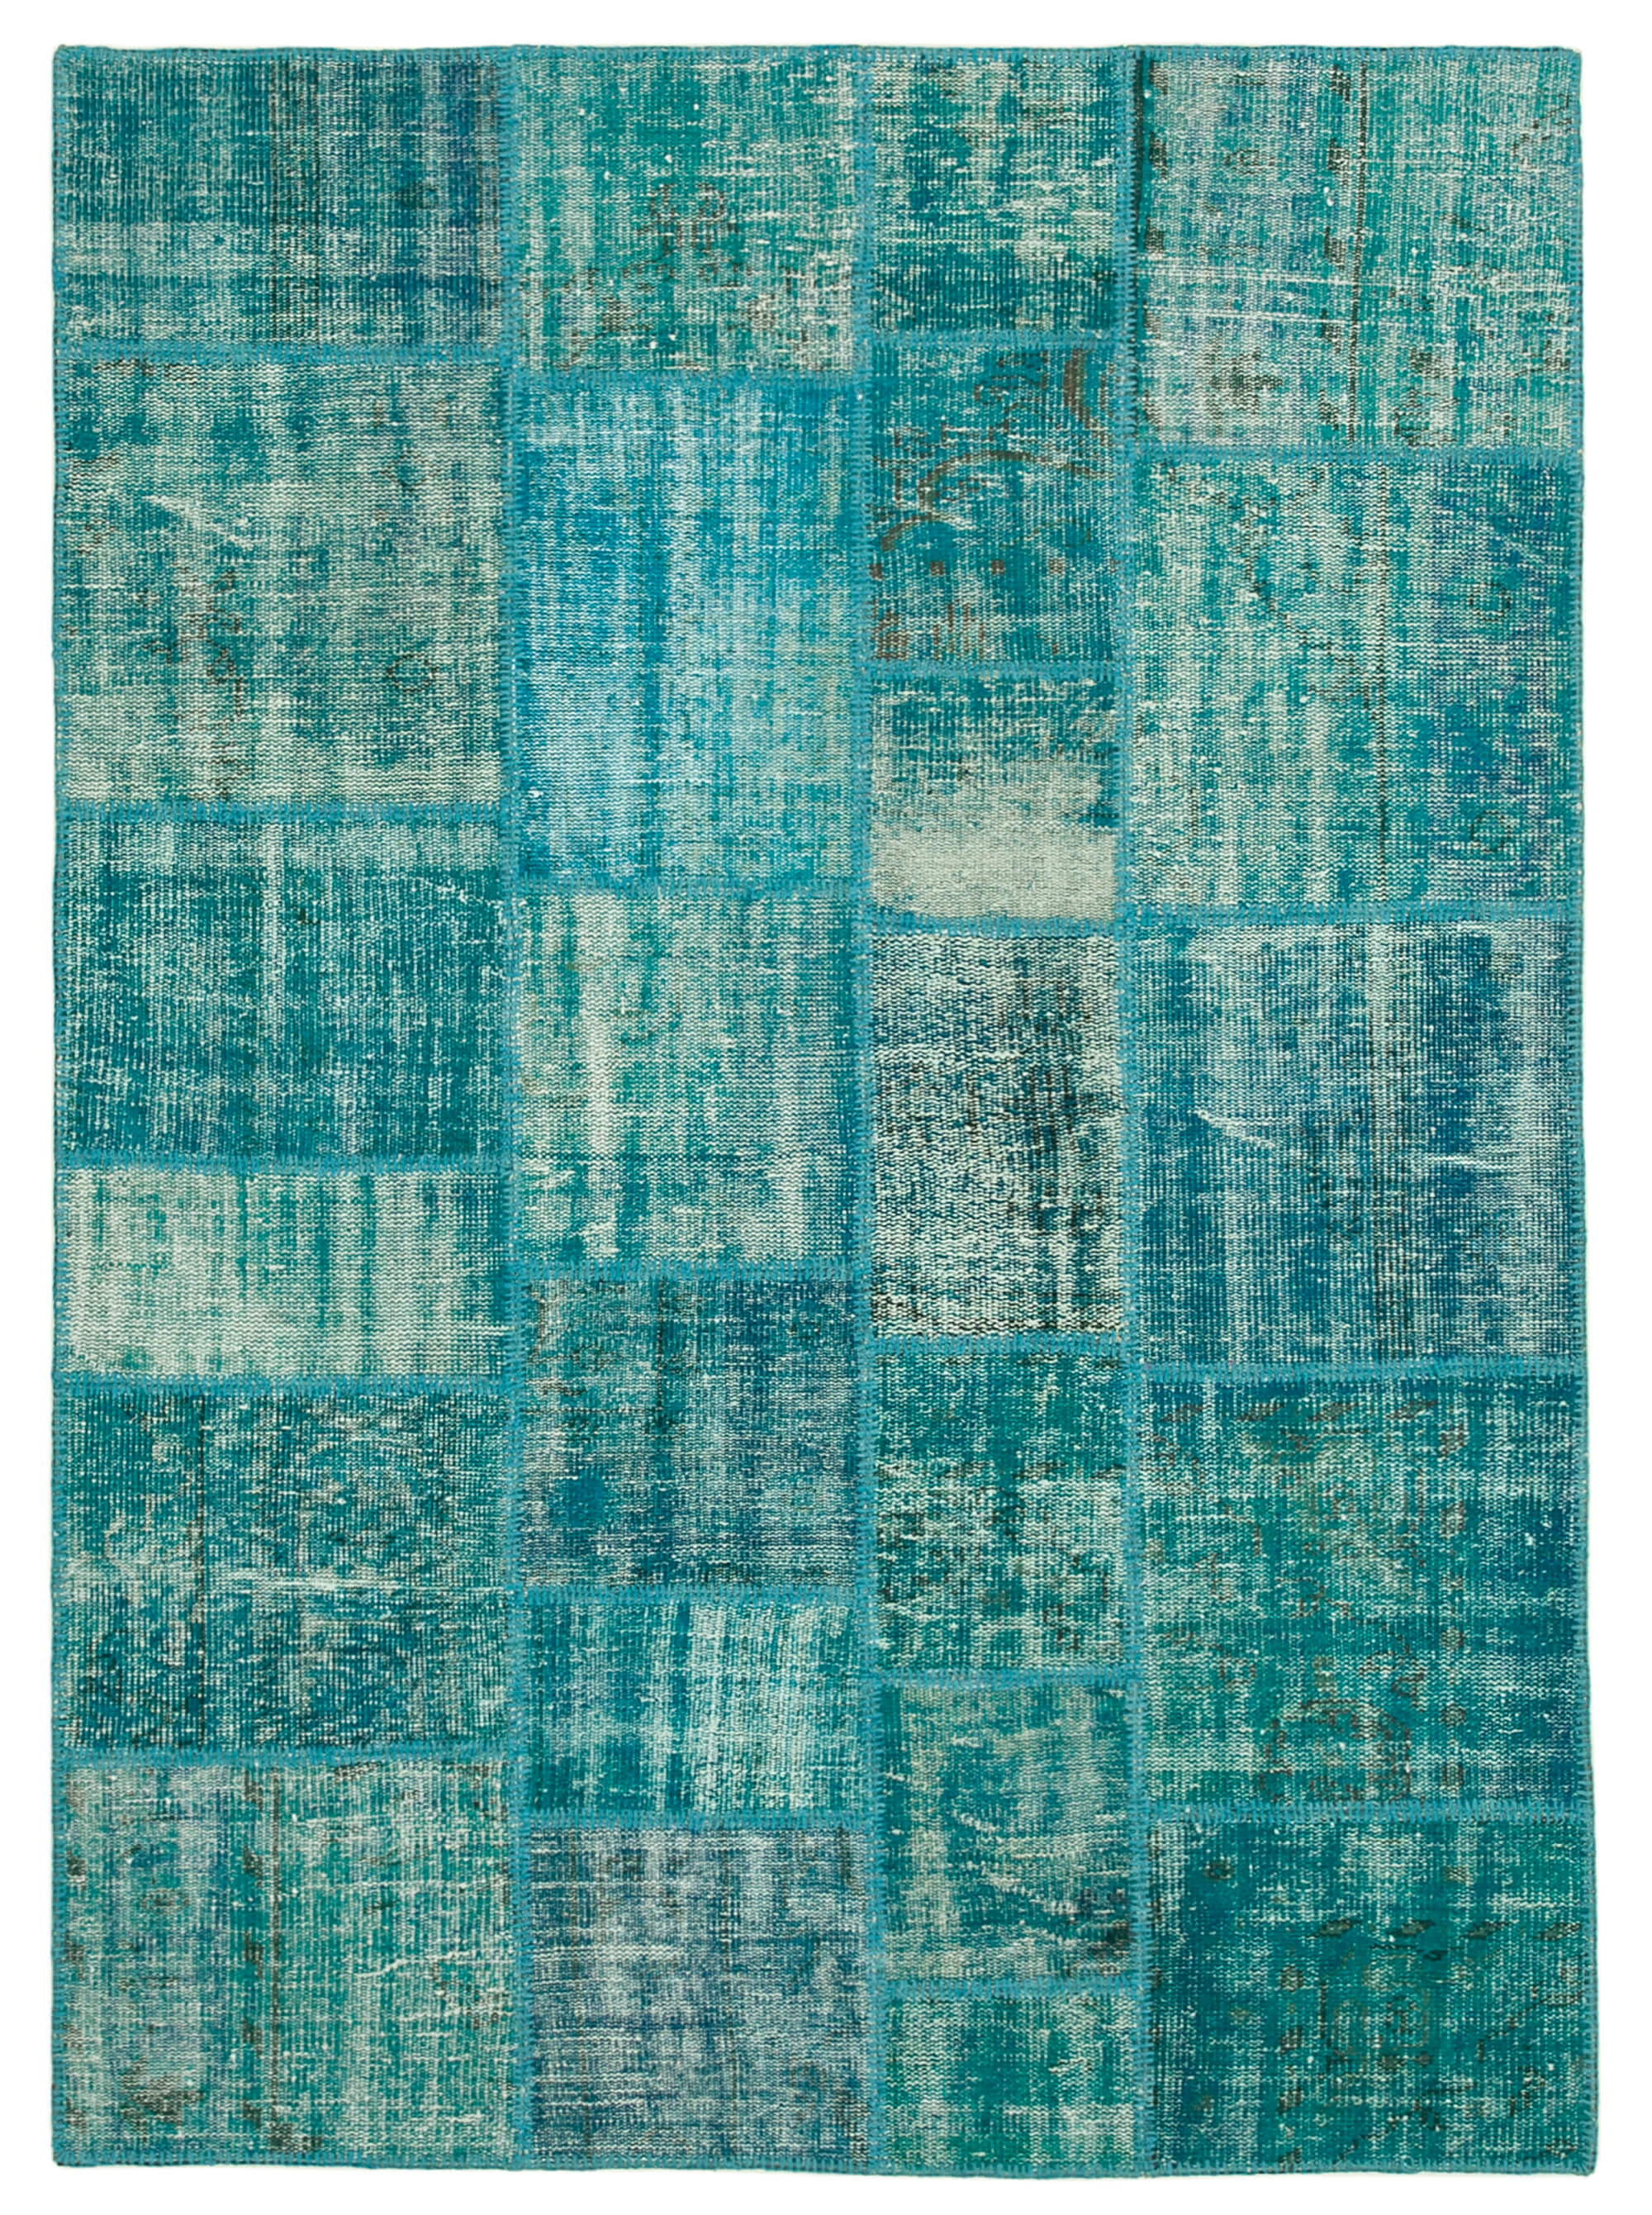 6x8 Turquoise Turkish Patchwork Small Area Rug -9848